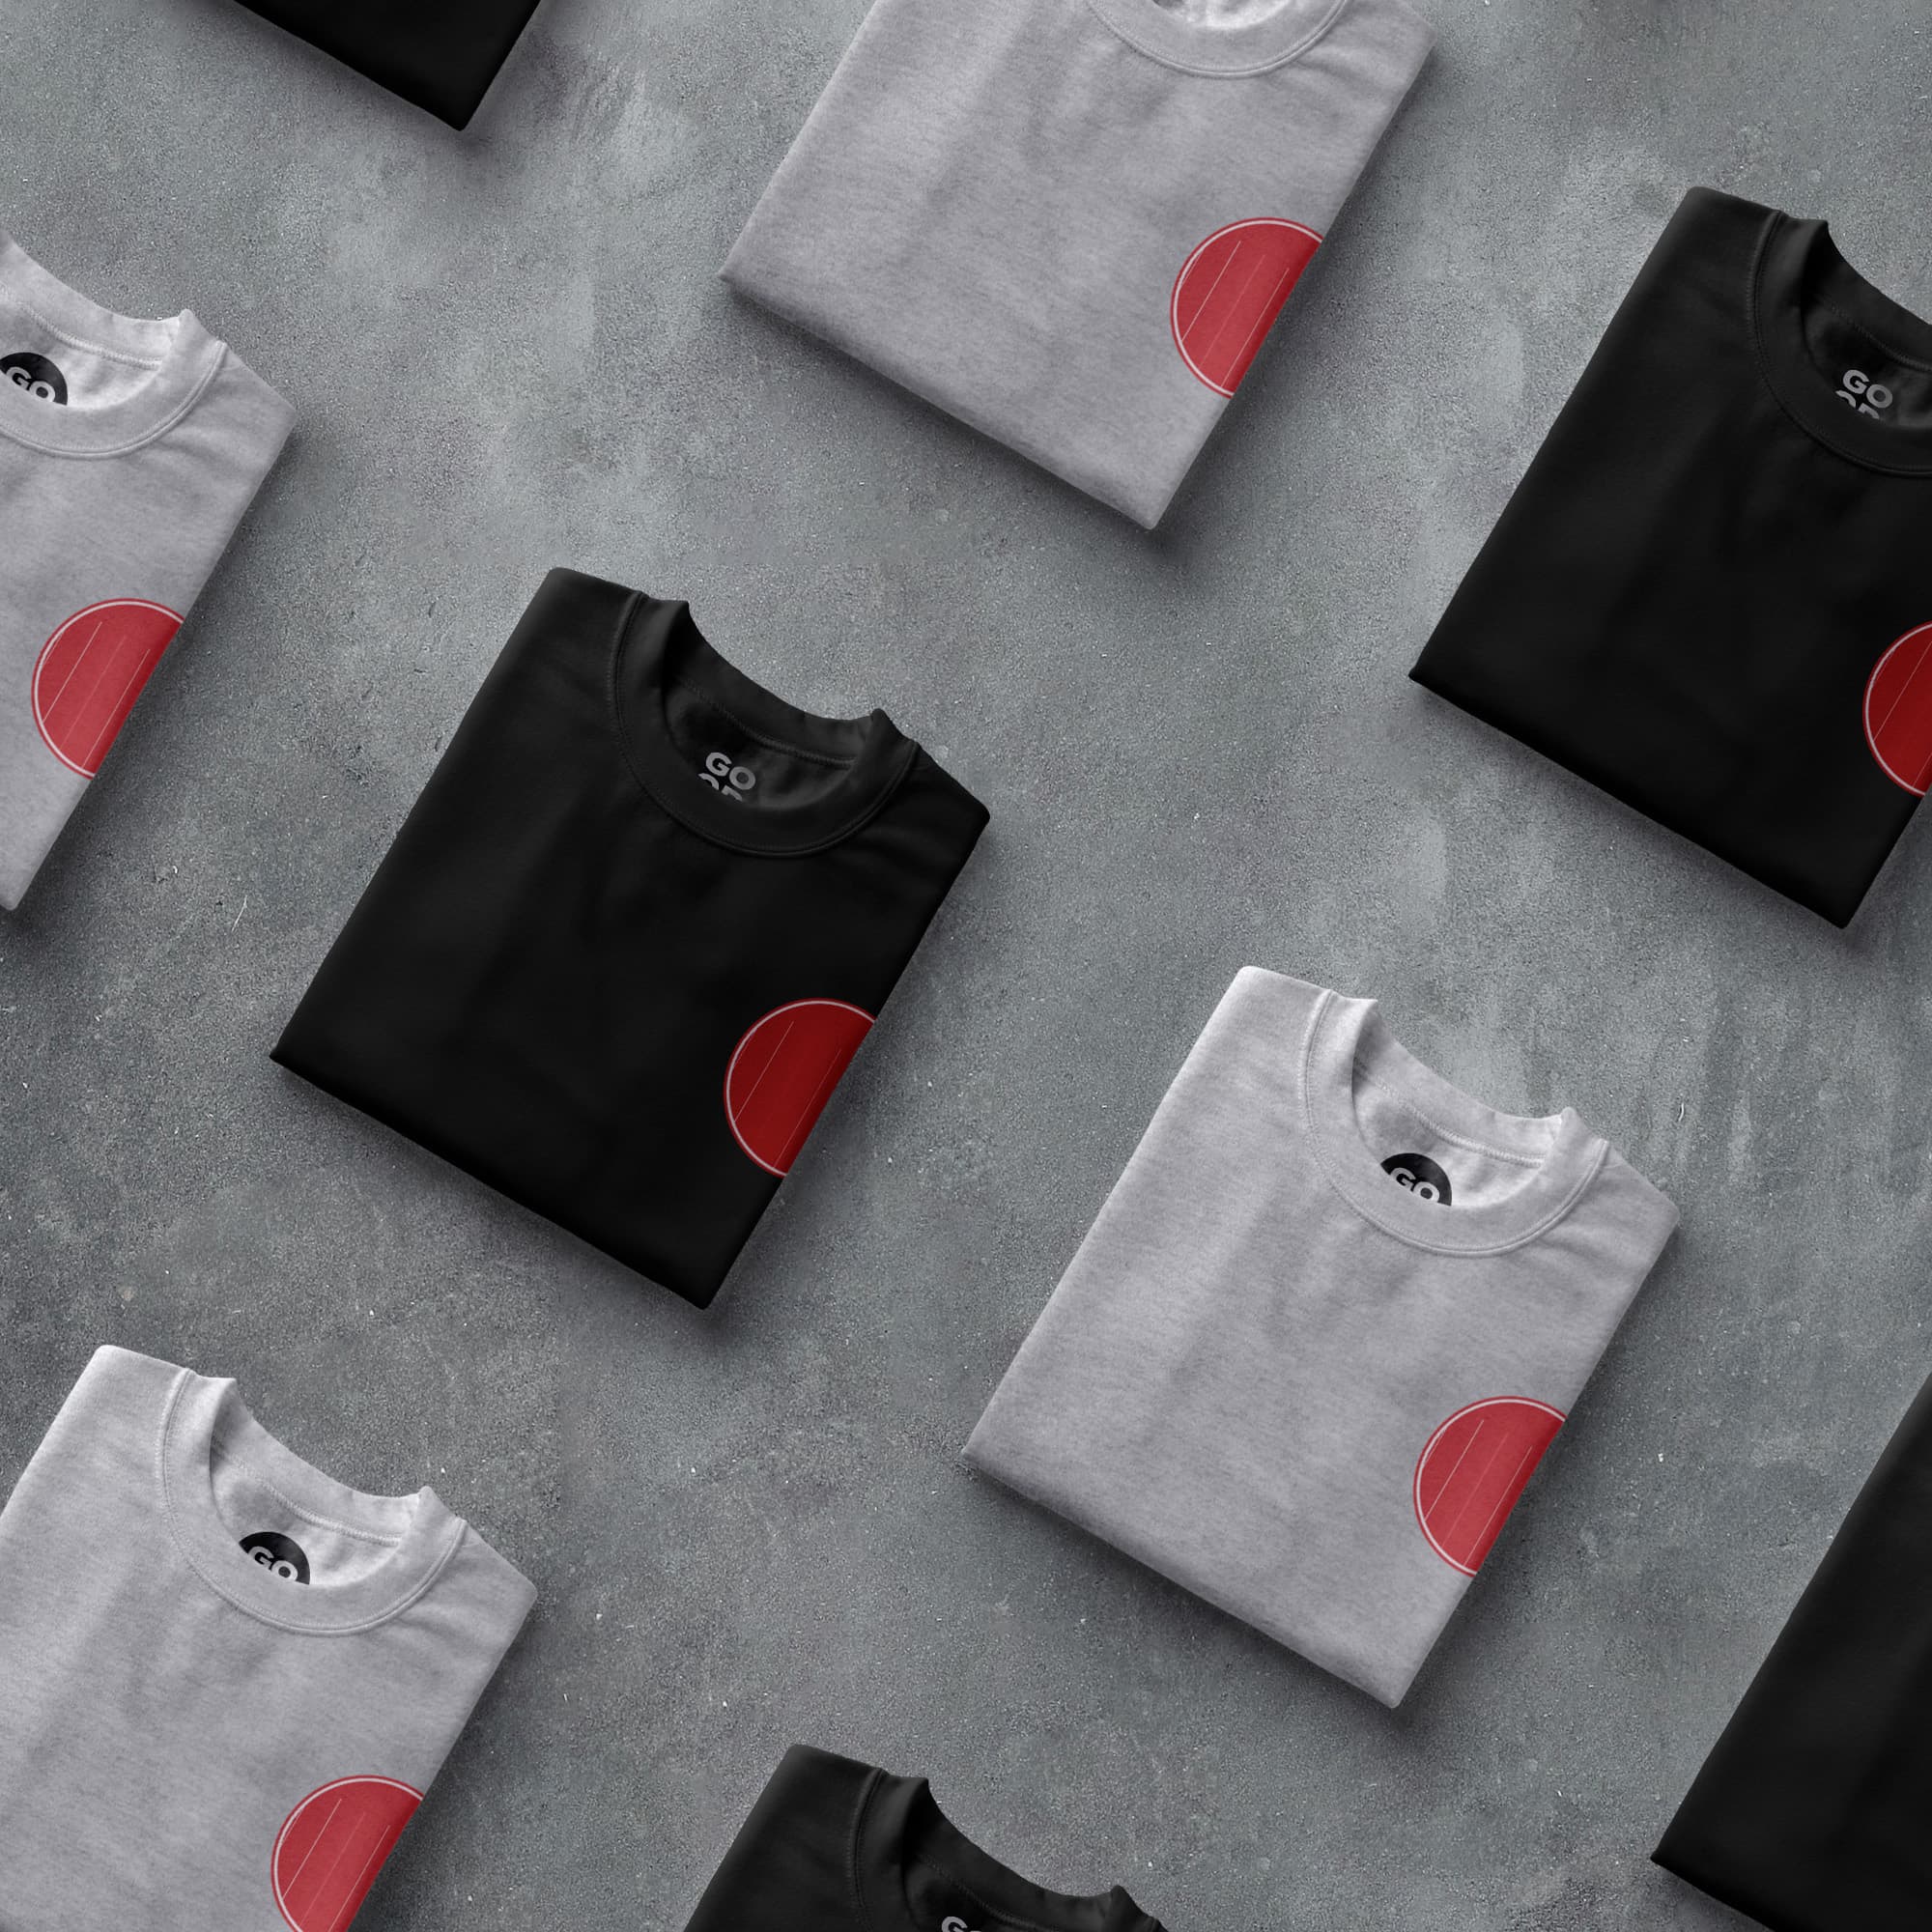 a group of black and white shirts with red circles on them